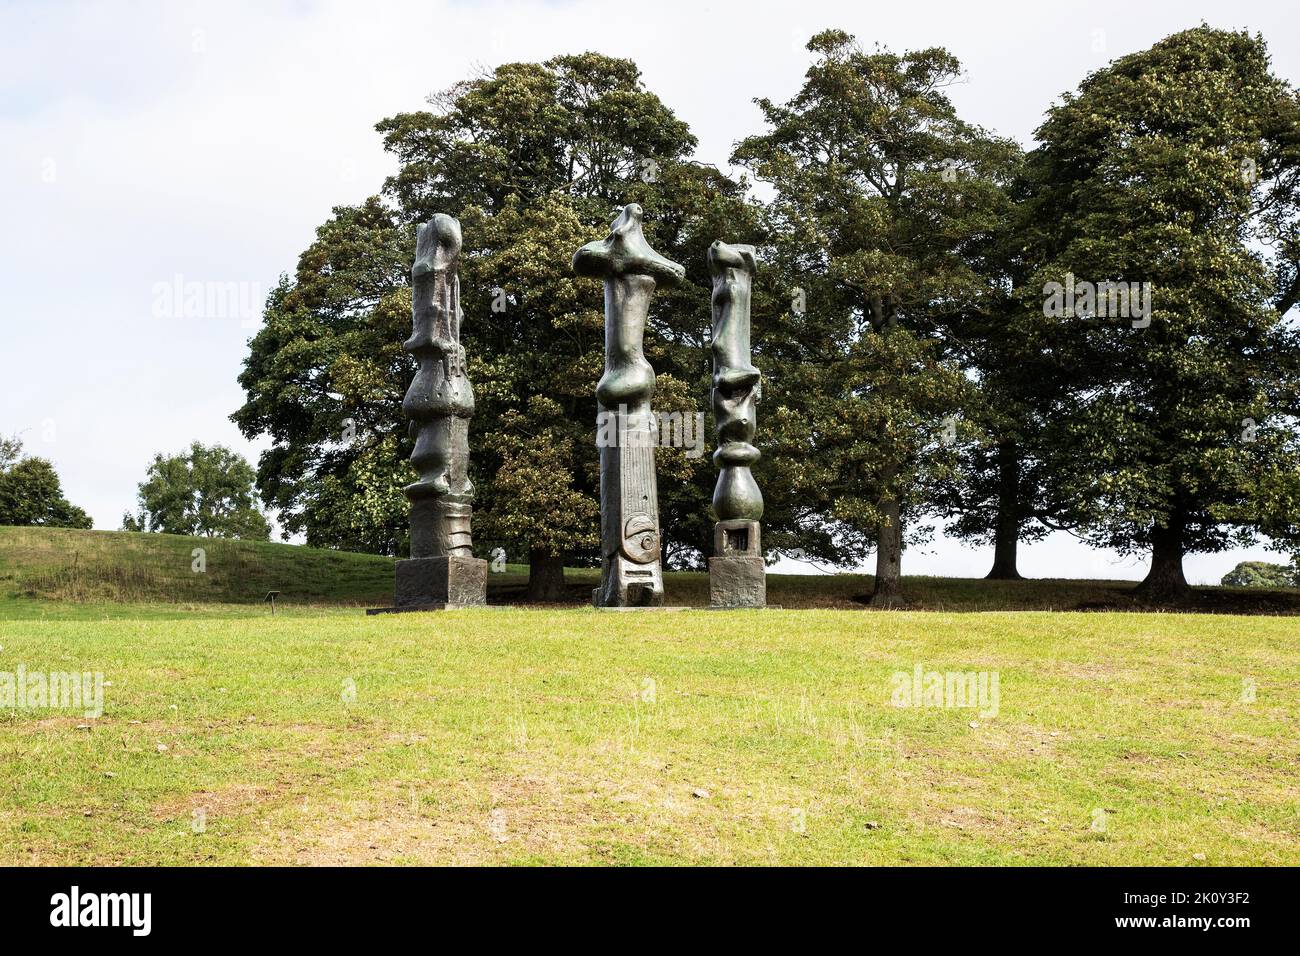 Henry Moore's: sculptures Upright Motives No. 1 (Glenkiln Cross): No 2; No 7 on display at the Yorkshire Sculpture Park, Wakefield, U.K. Stock Photo